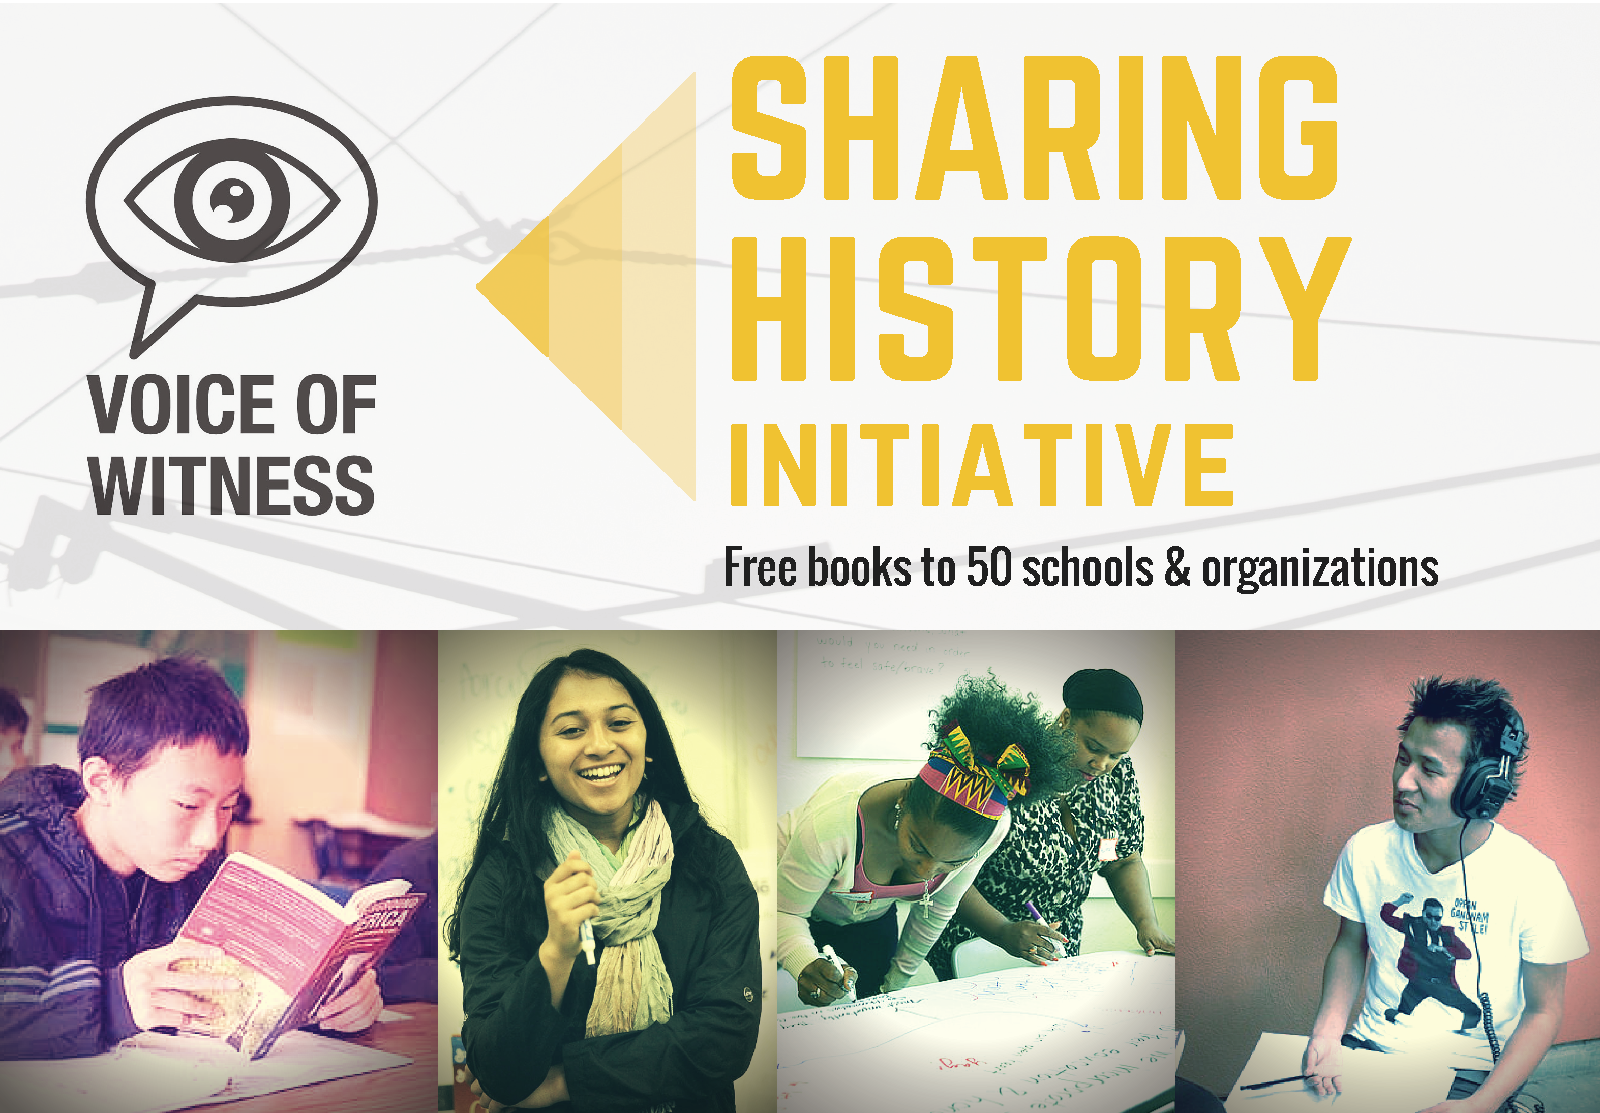 Launching Today: The Voice of Witness Sharing History Initiative